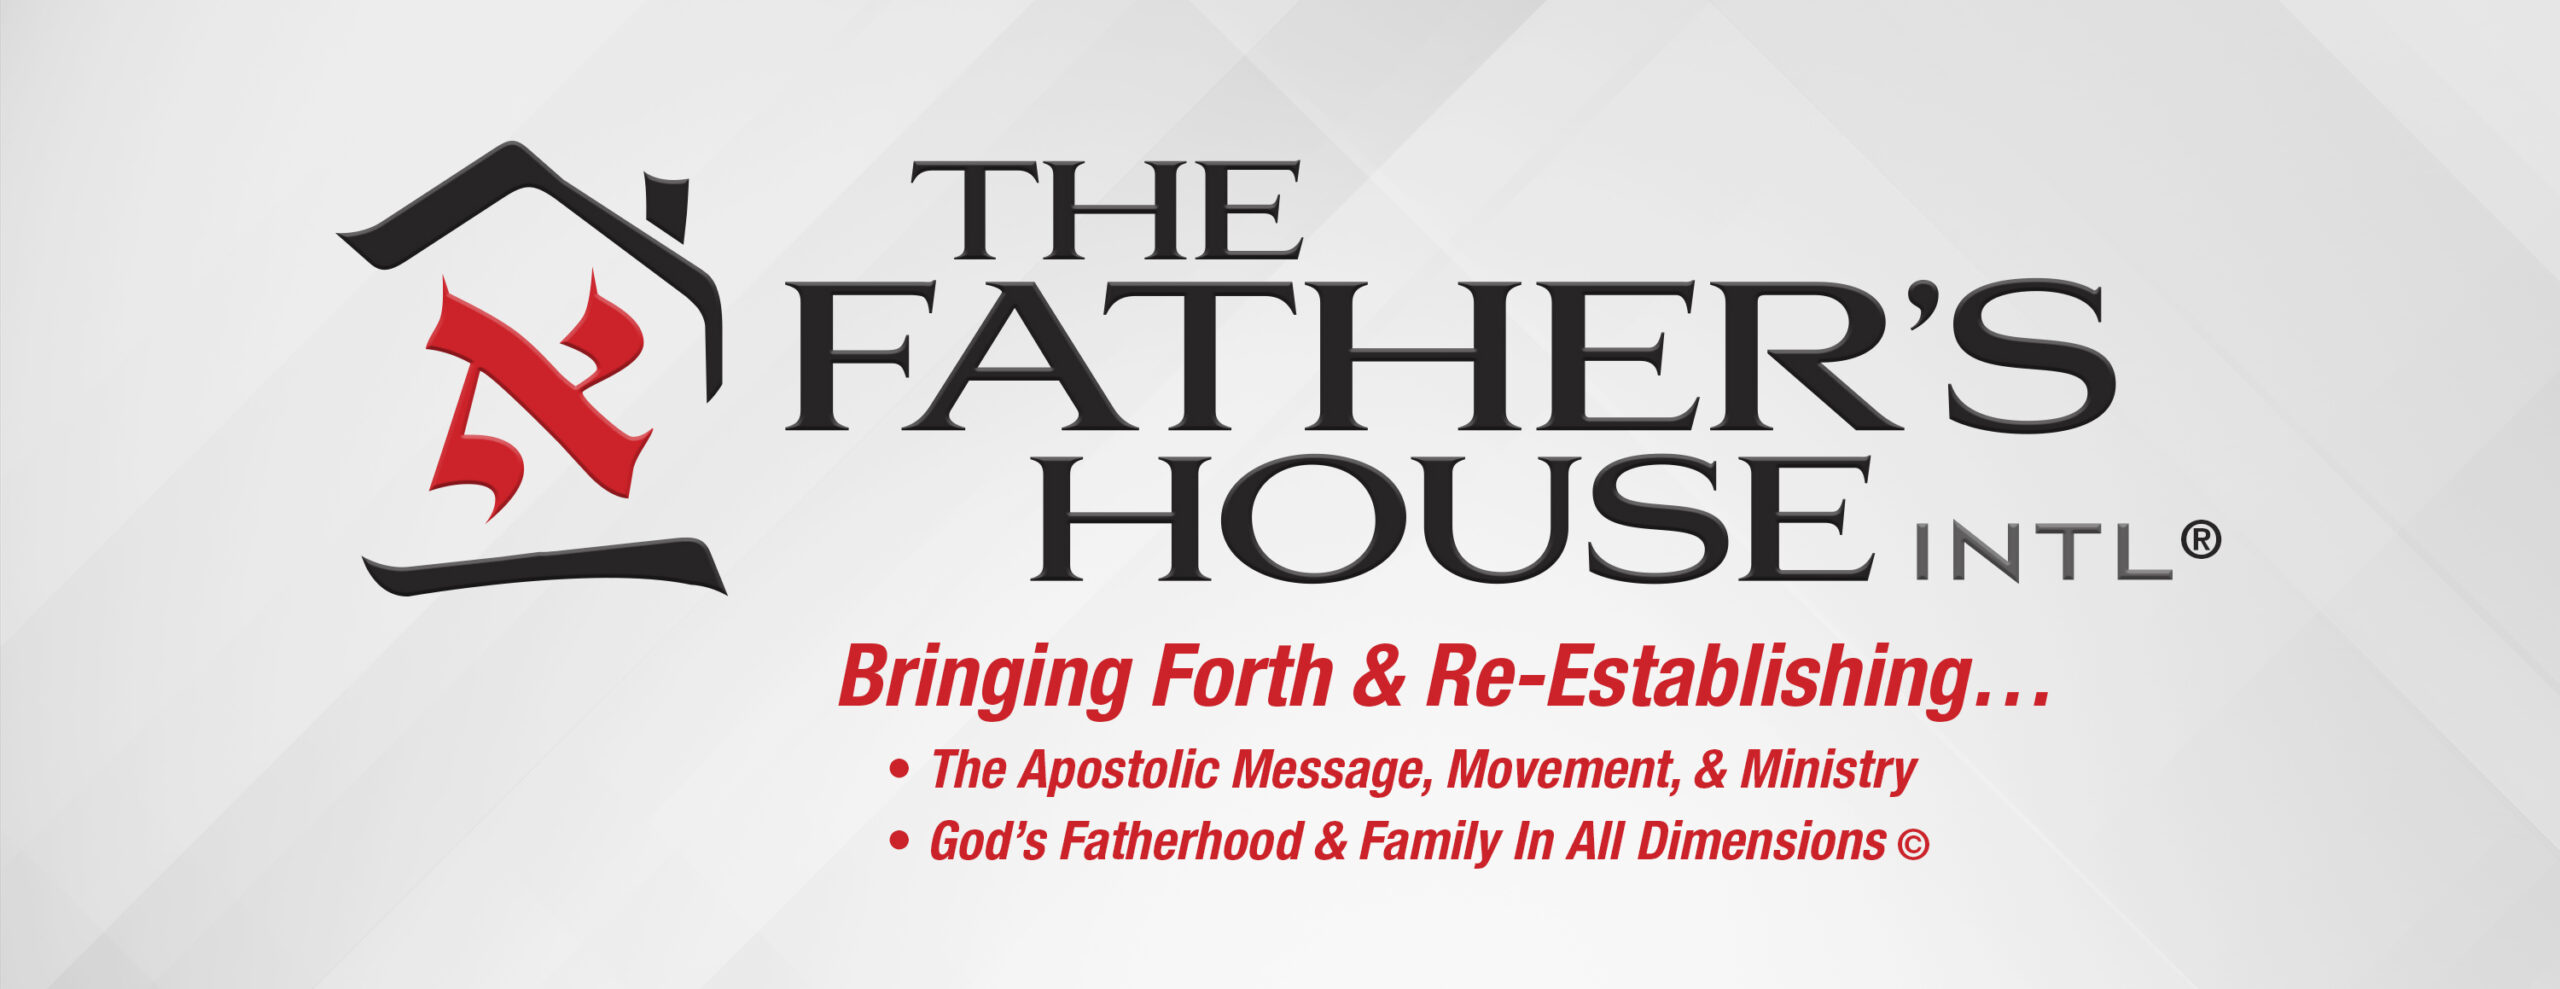 Slider 01 – The Father’s House Logo – Copyright and Registration Marks